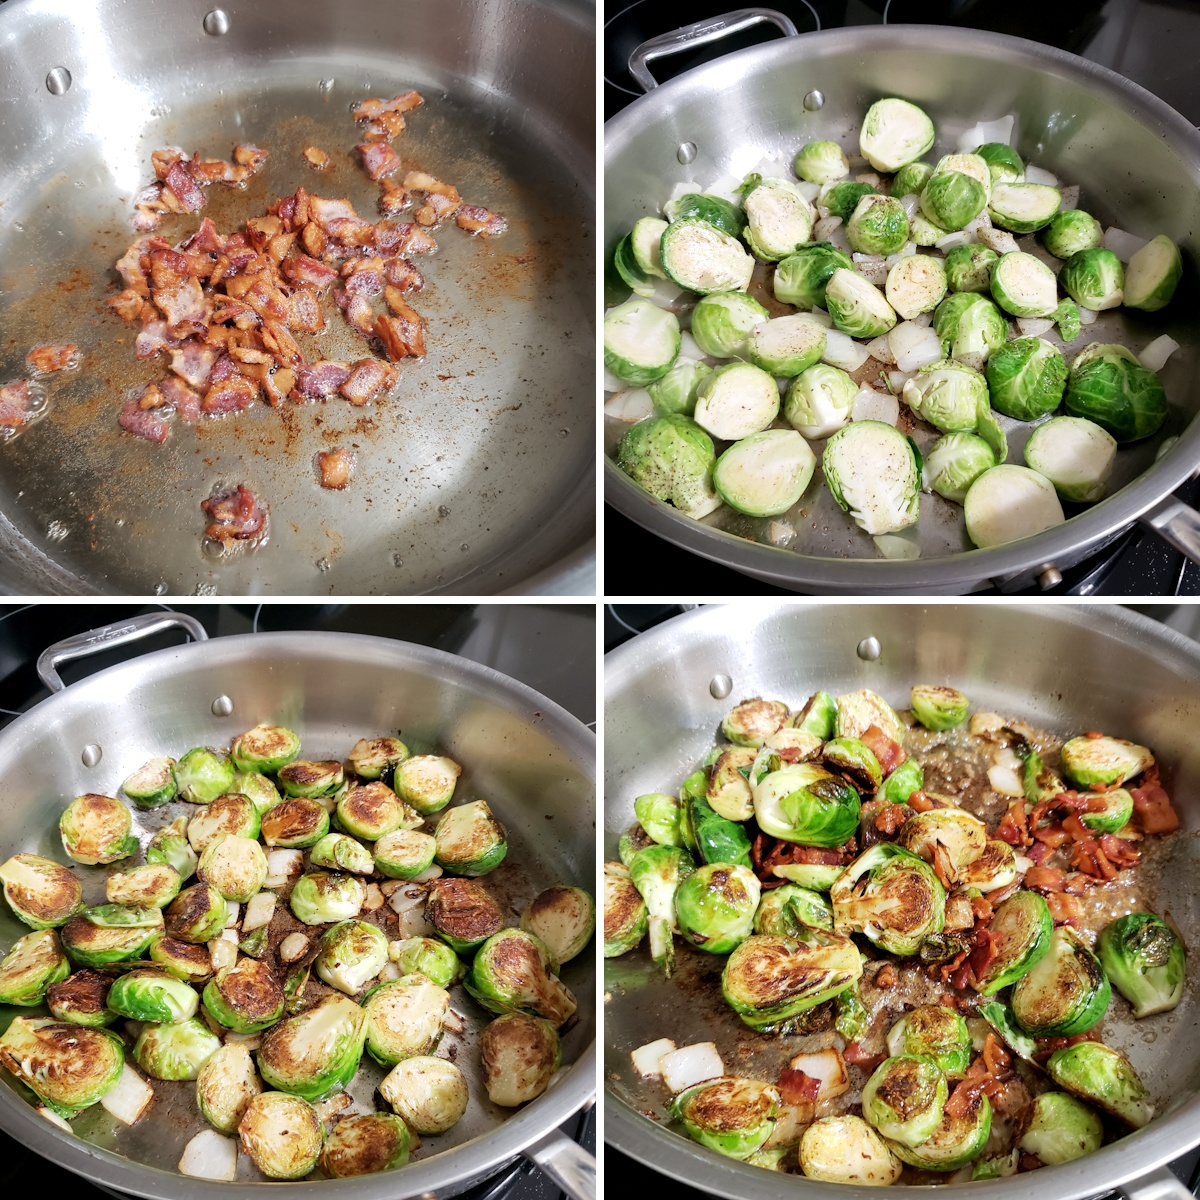 Cooking bacon and brussels sprouts in a saute pan.